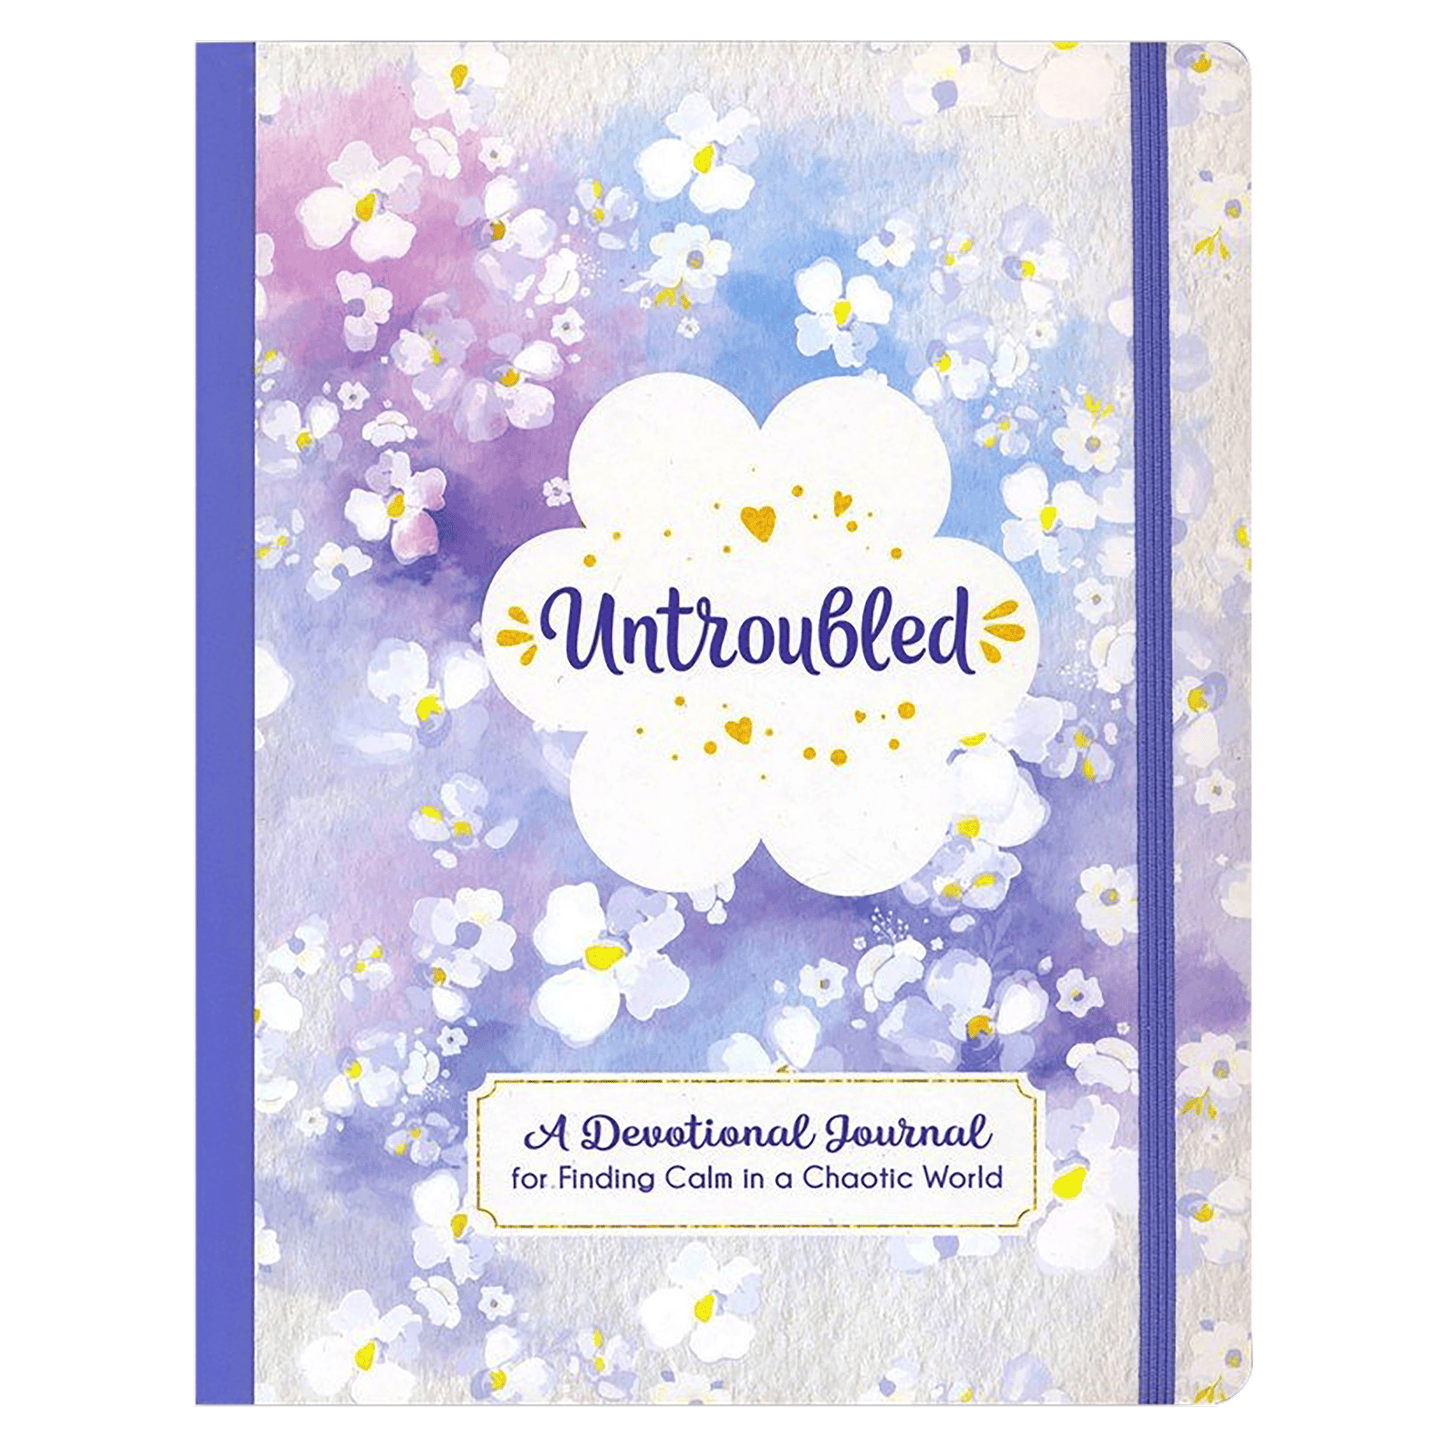 Untroubled: A Devotional Journal for Finding Calm in a Chaotic World